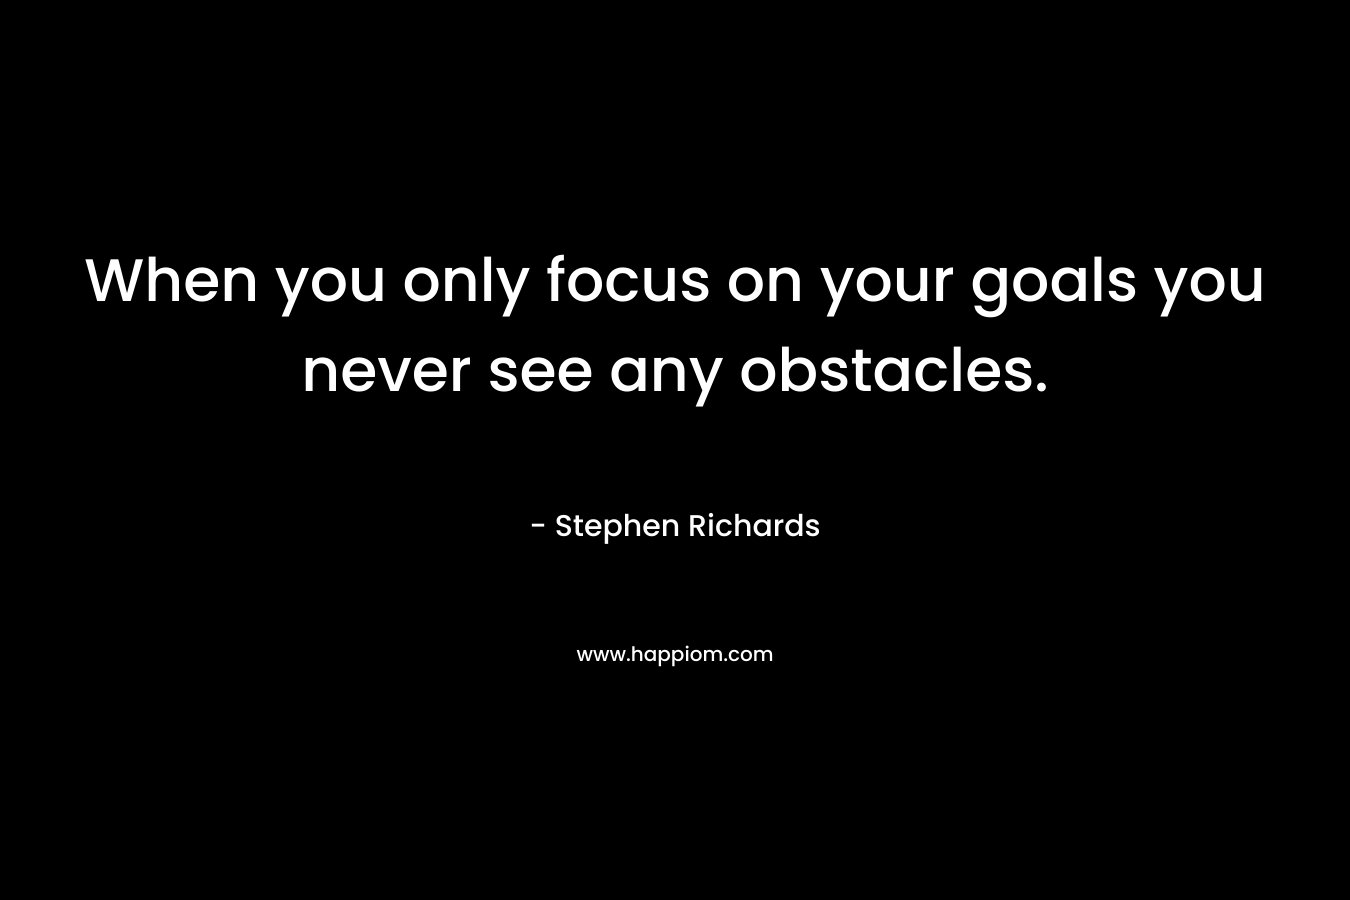 When you only focus on your goals you never see any obstacles.